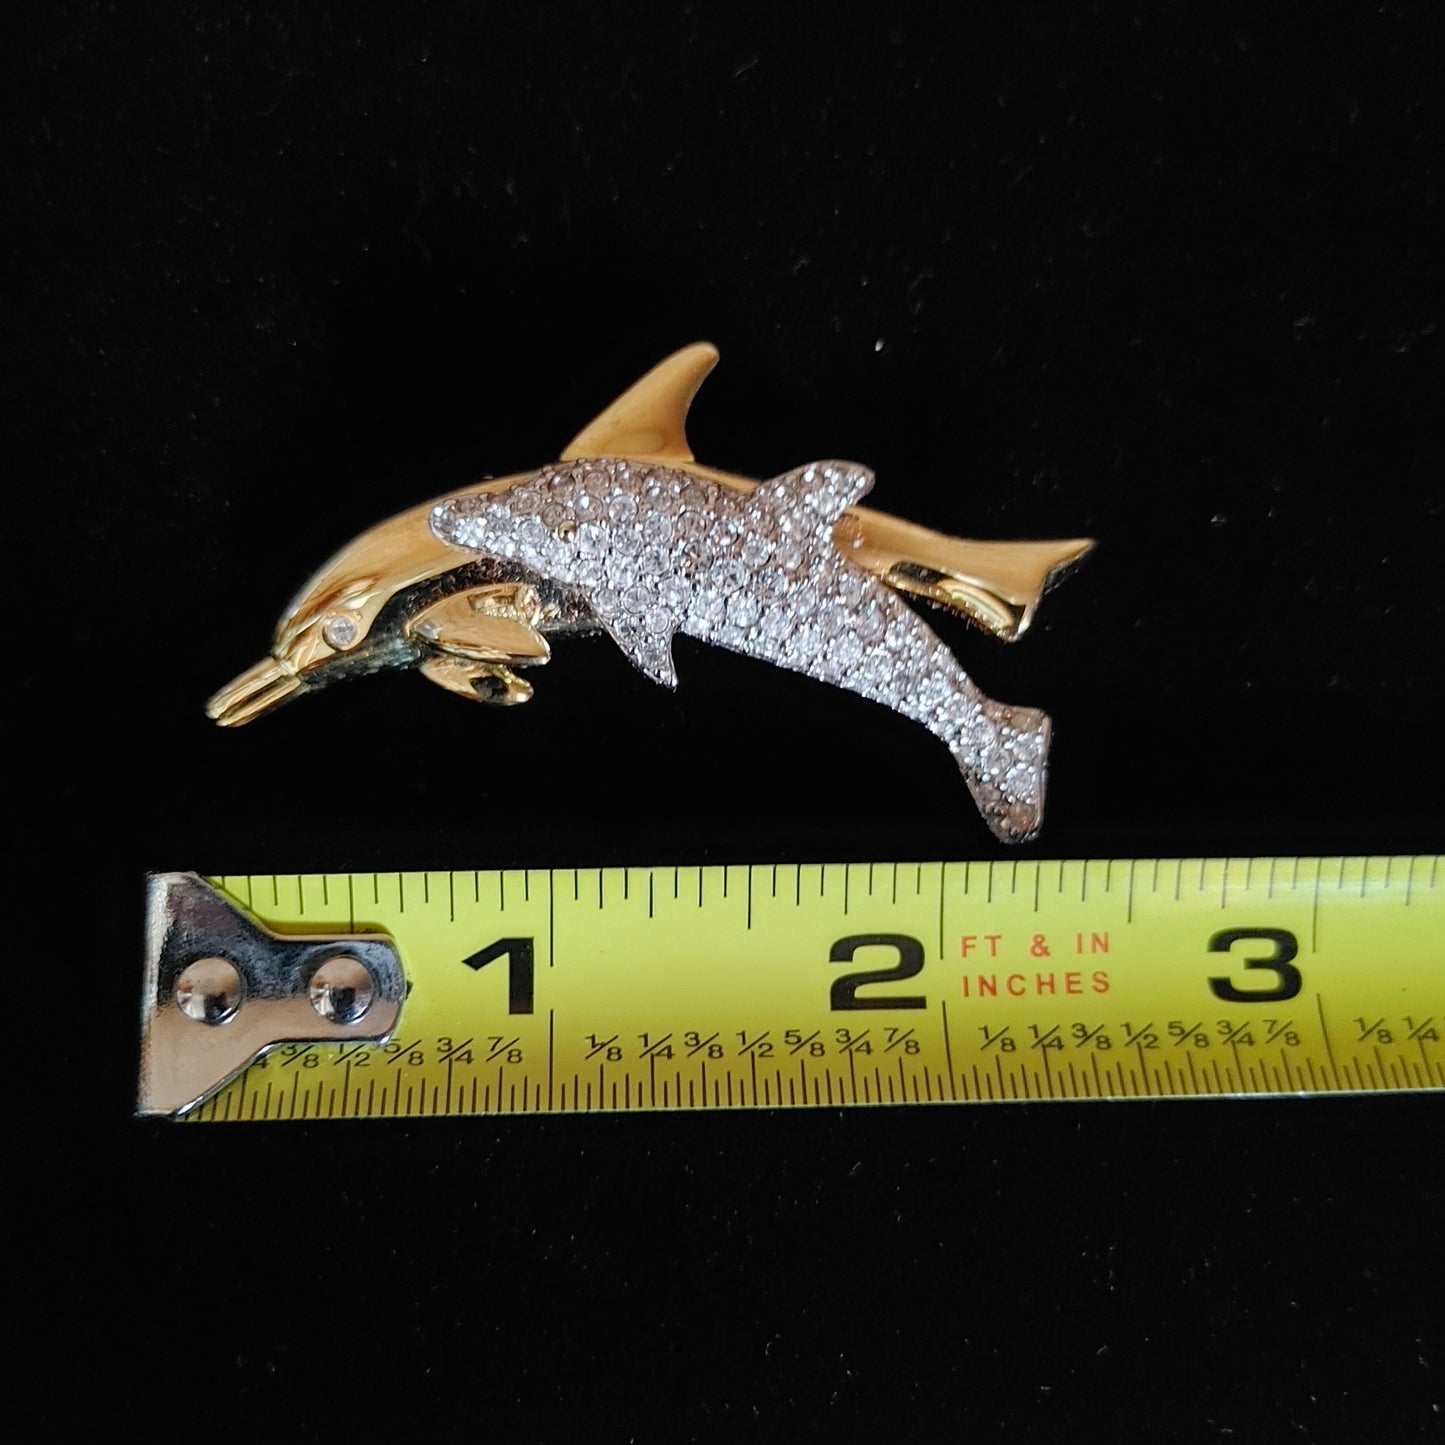 Swarovski Set! Dolphins Mother Child Pin Brooch Gold Crystals Swan Free Shipping